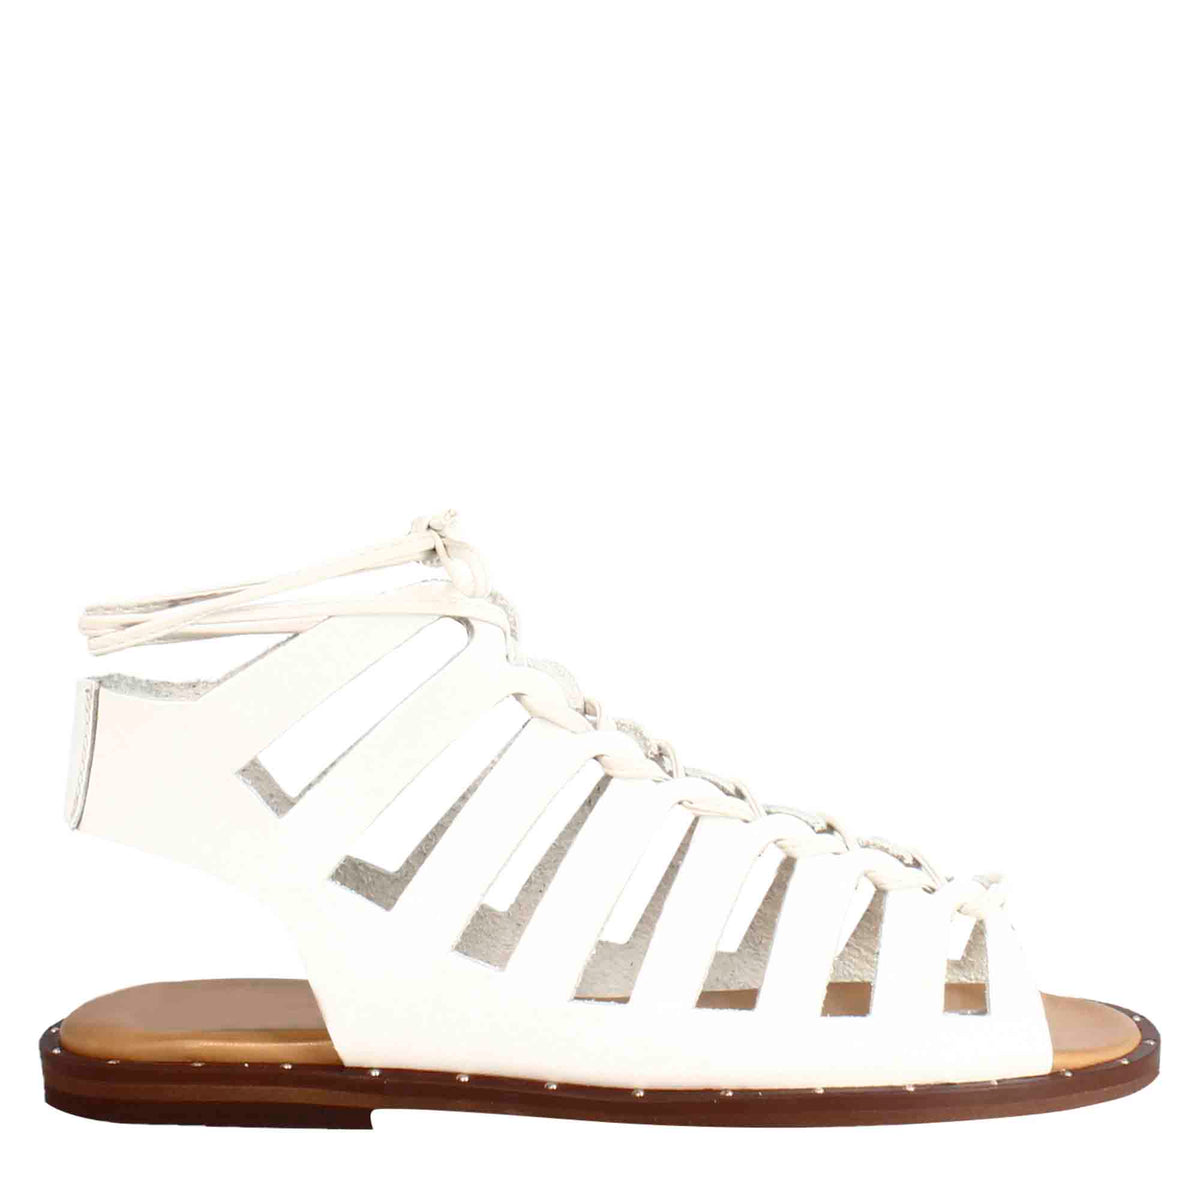 Women's gladiator sandal with handmade laces in white leather